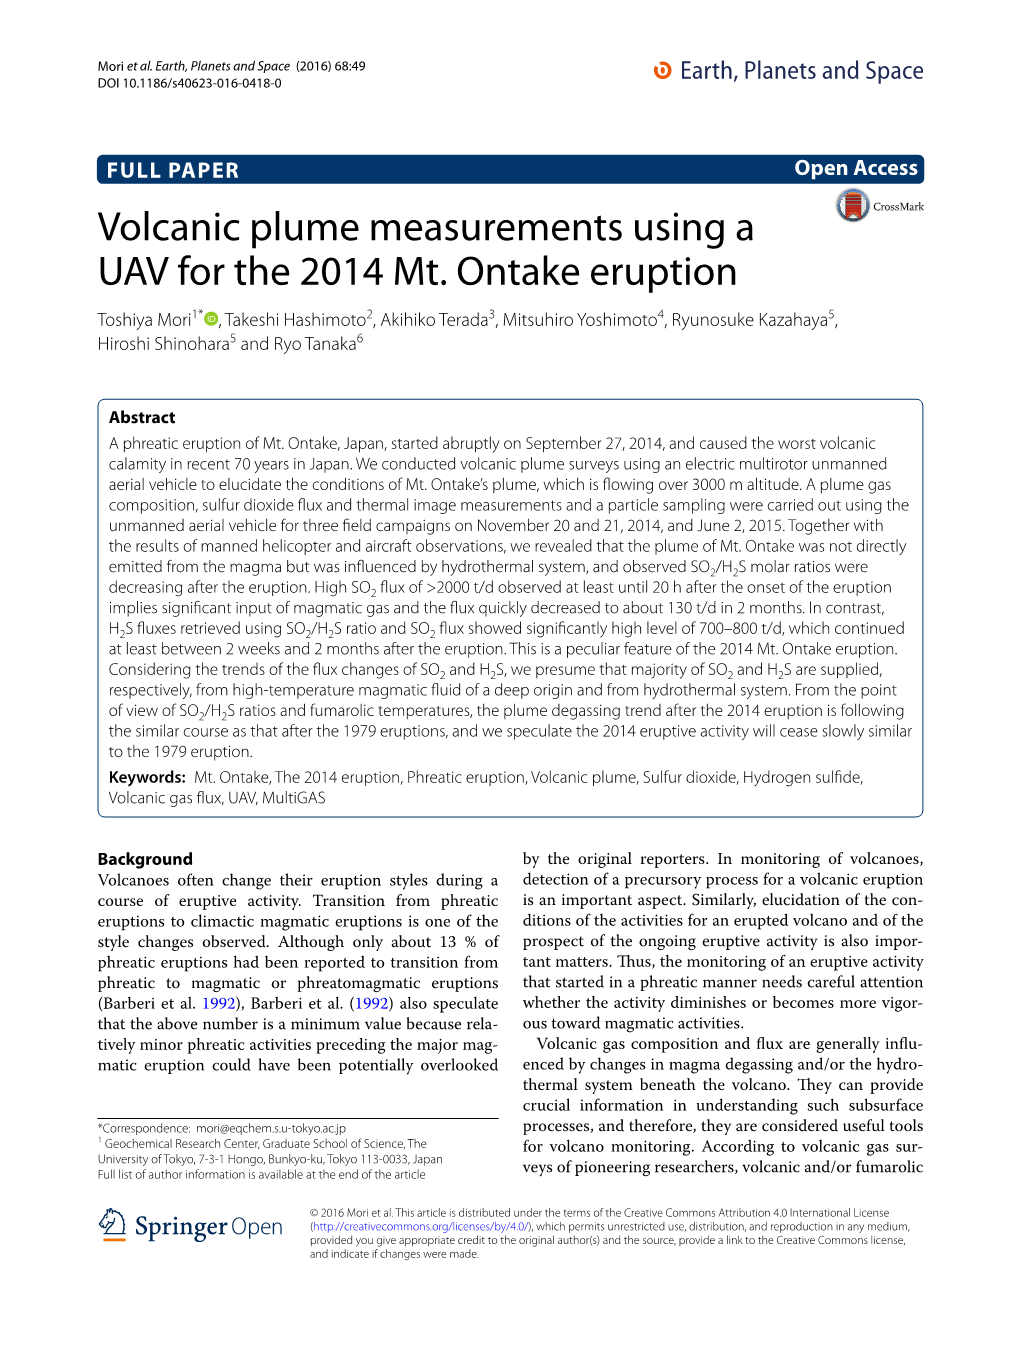 Volcanic Plume Measurements Using a UAV for the 2014 Mt. Ontake